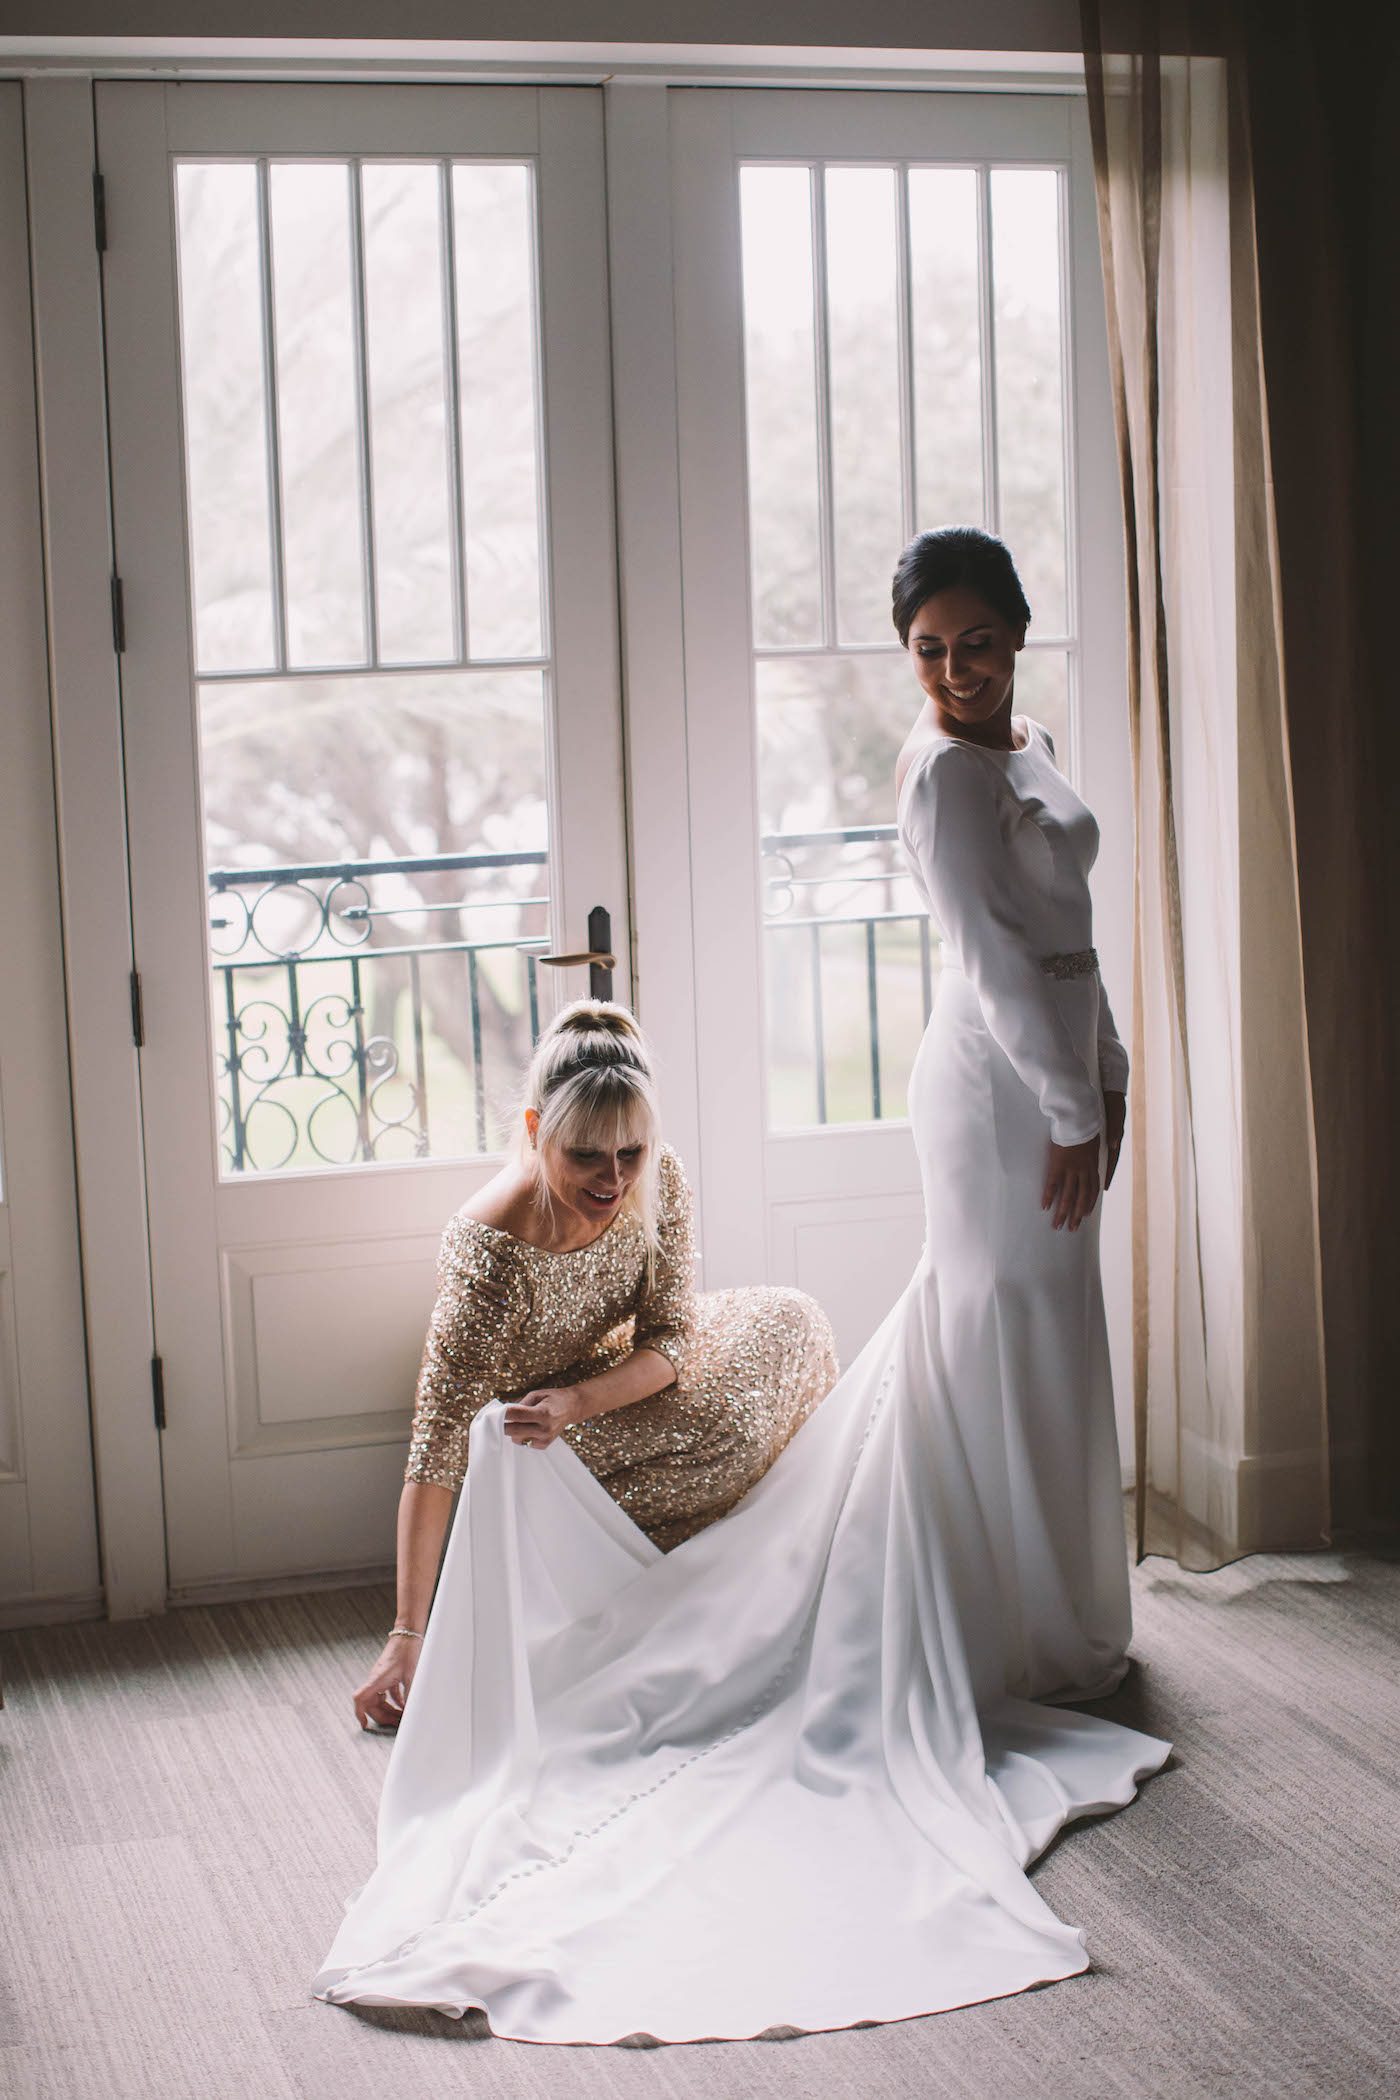 Timeless Florida Bride and Mother Getting Ready Portrait | Bride Wearing White Mikaella Bridal Wedding Dress with Swoop Scallop Neckline, Long Sleeves | Tampa Bay Boutique Hotel Wedding Venue The Birchwood